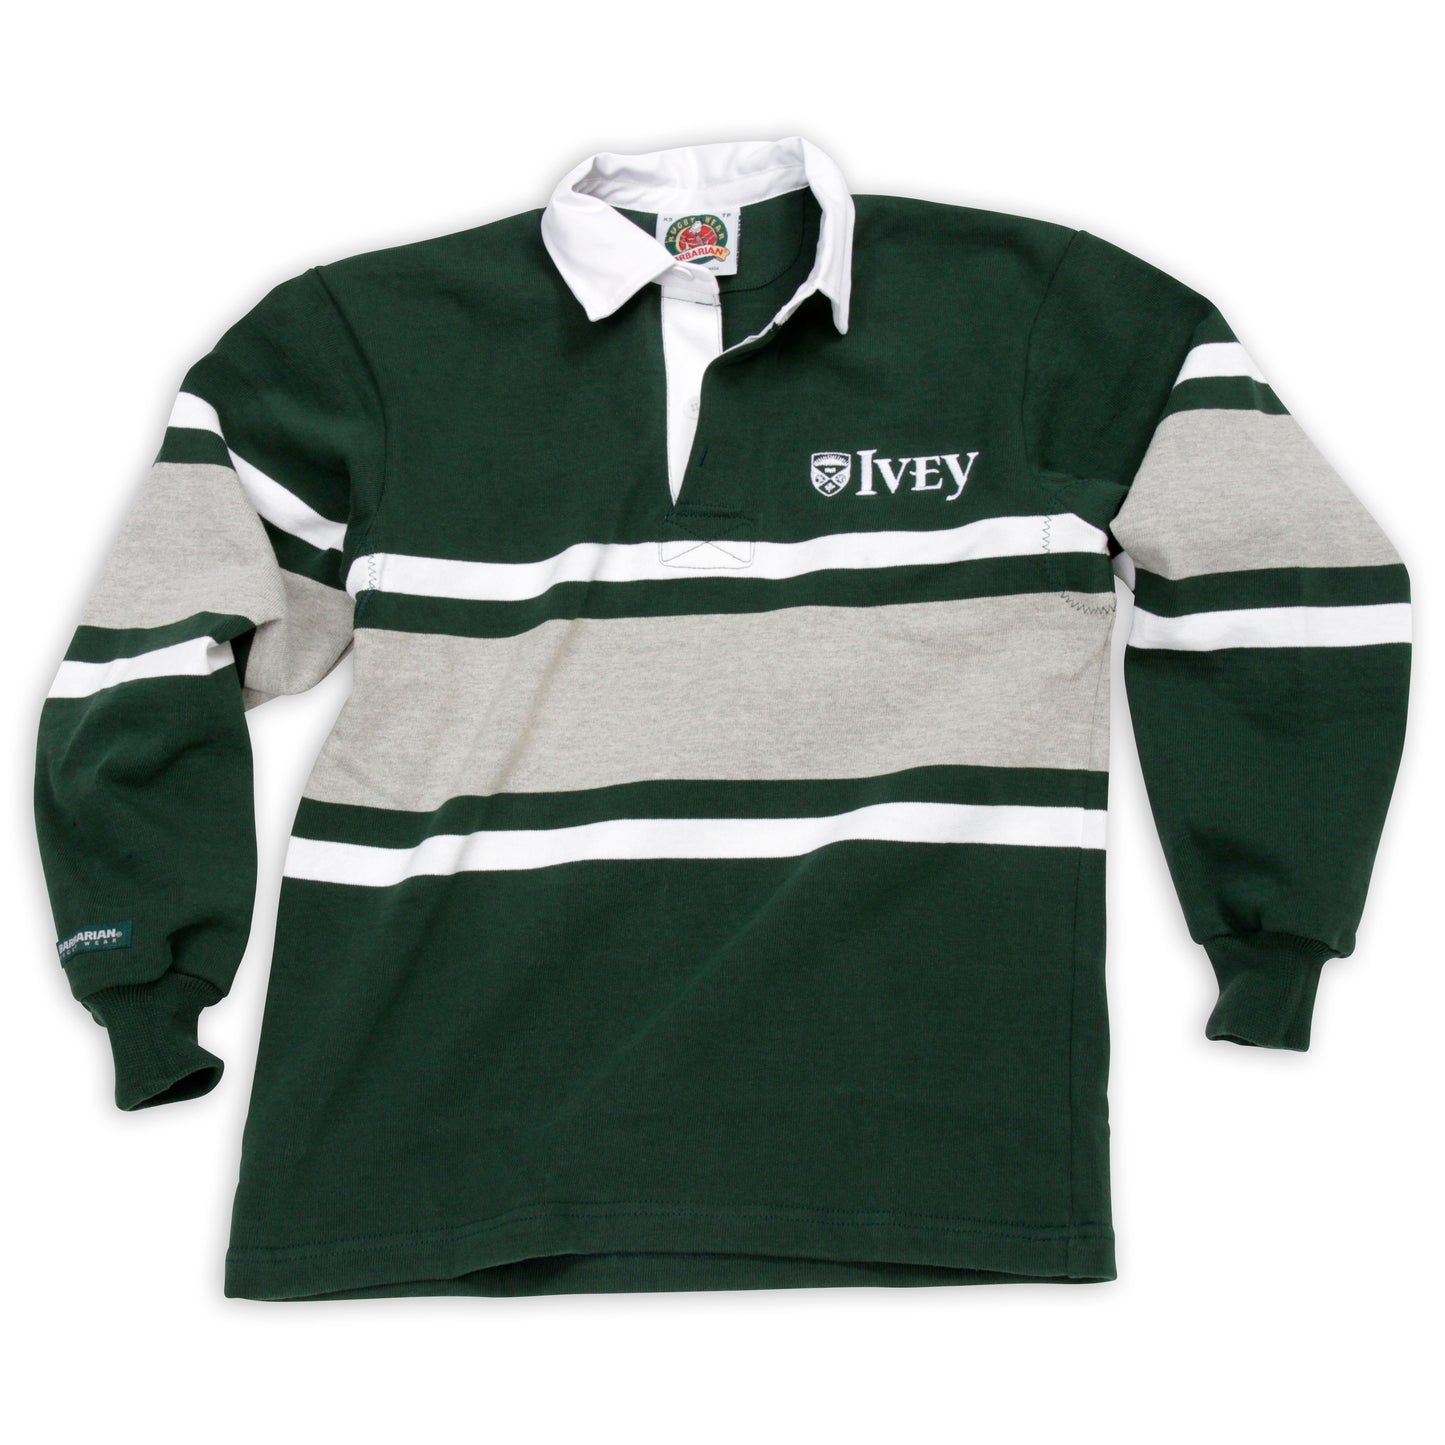 Barbarian Ivey Rugby Shirt